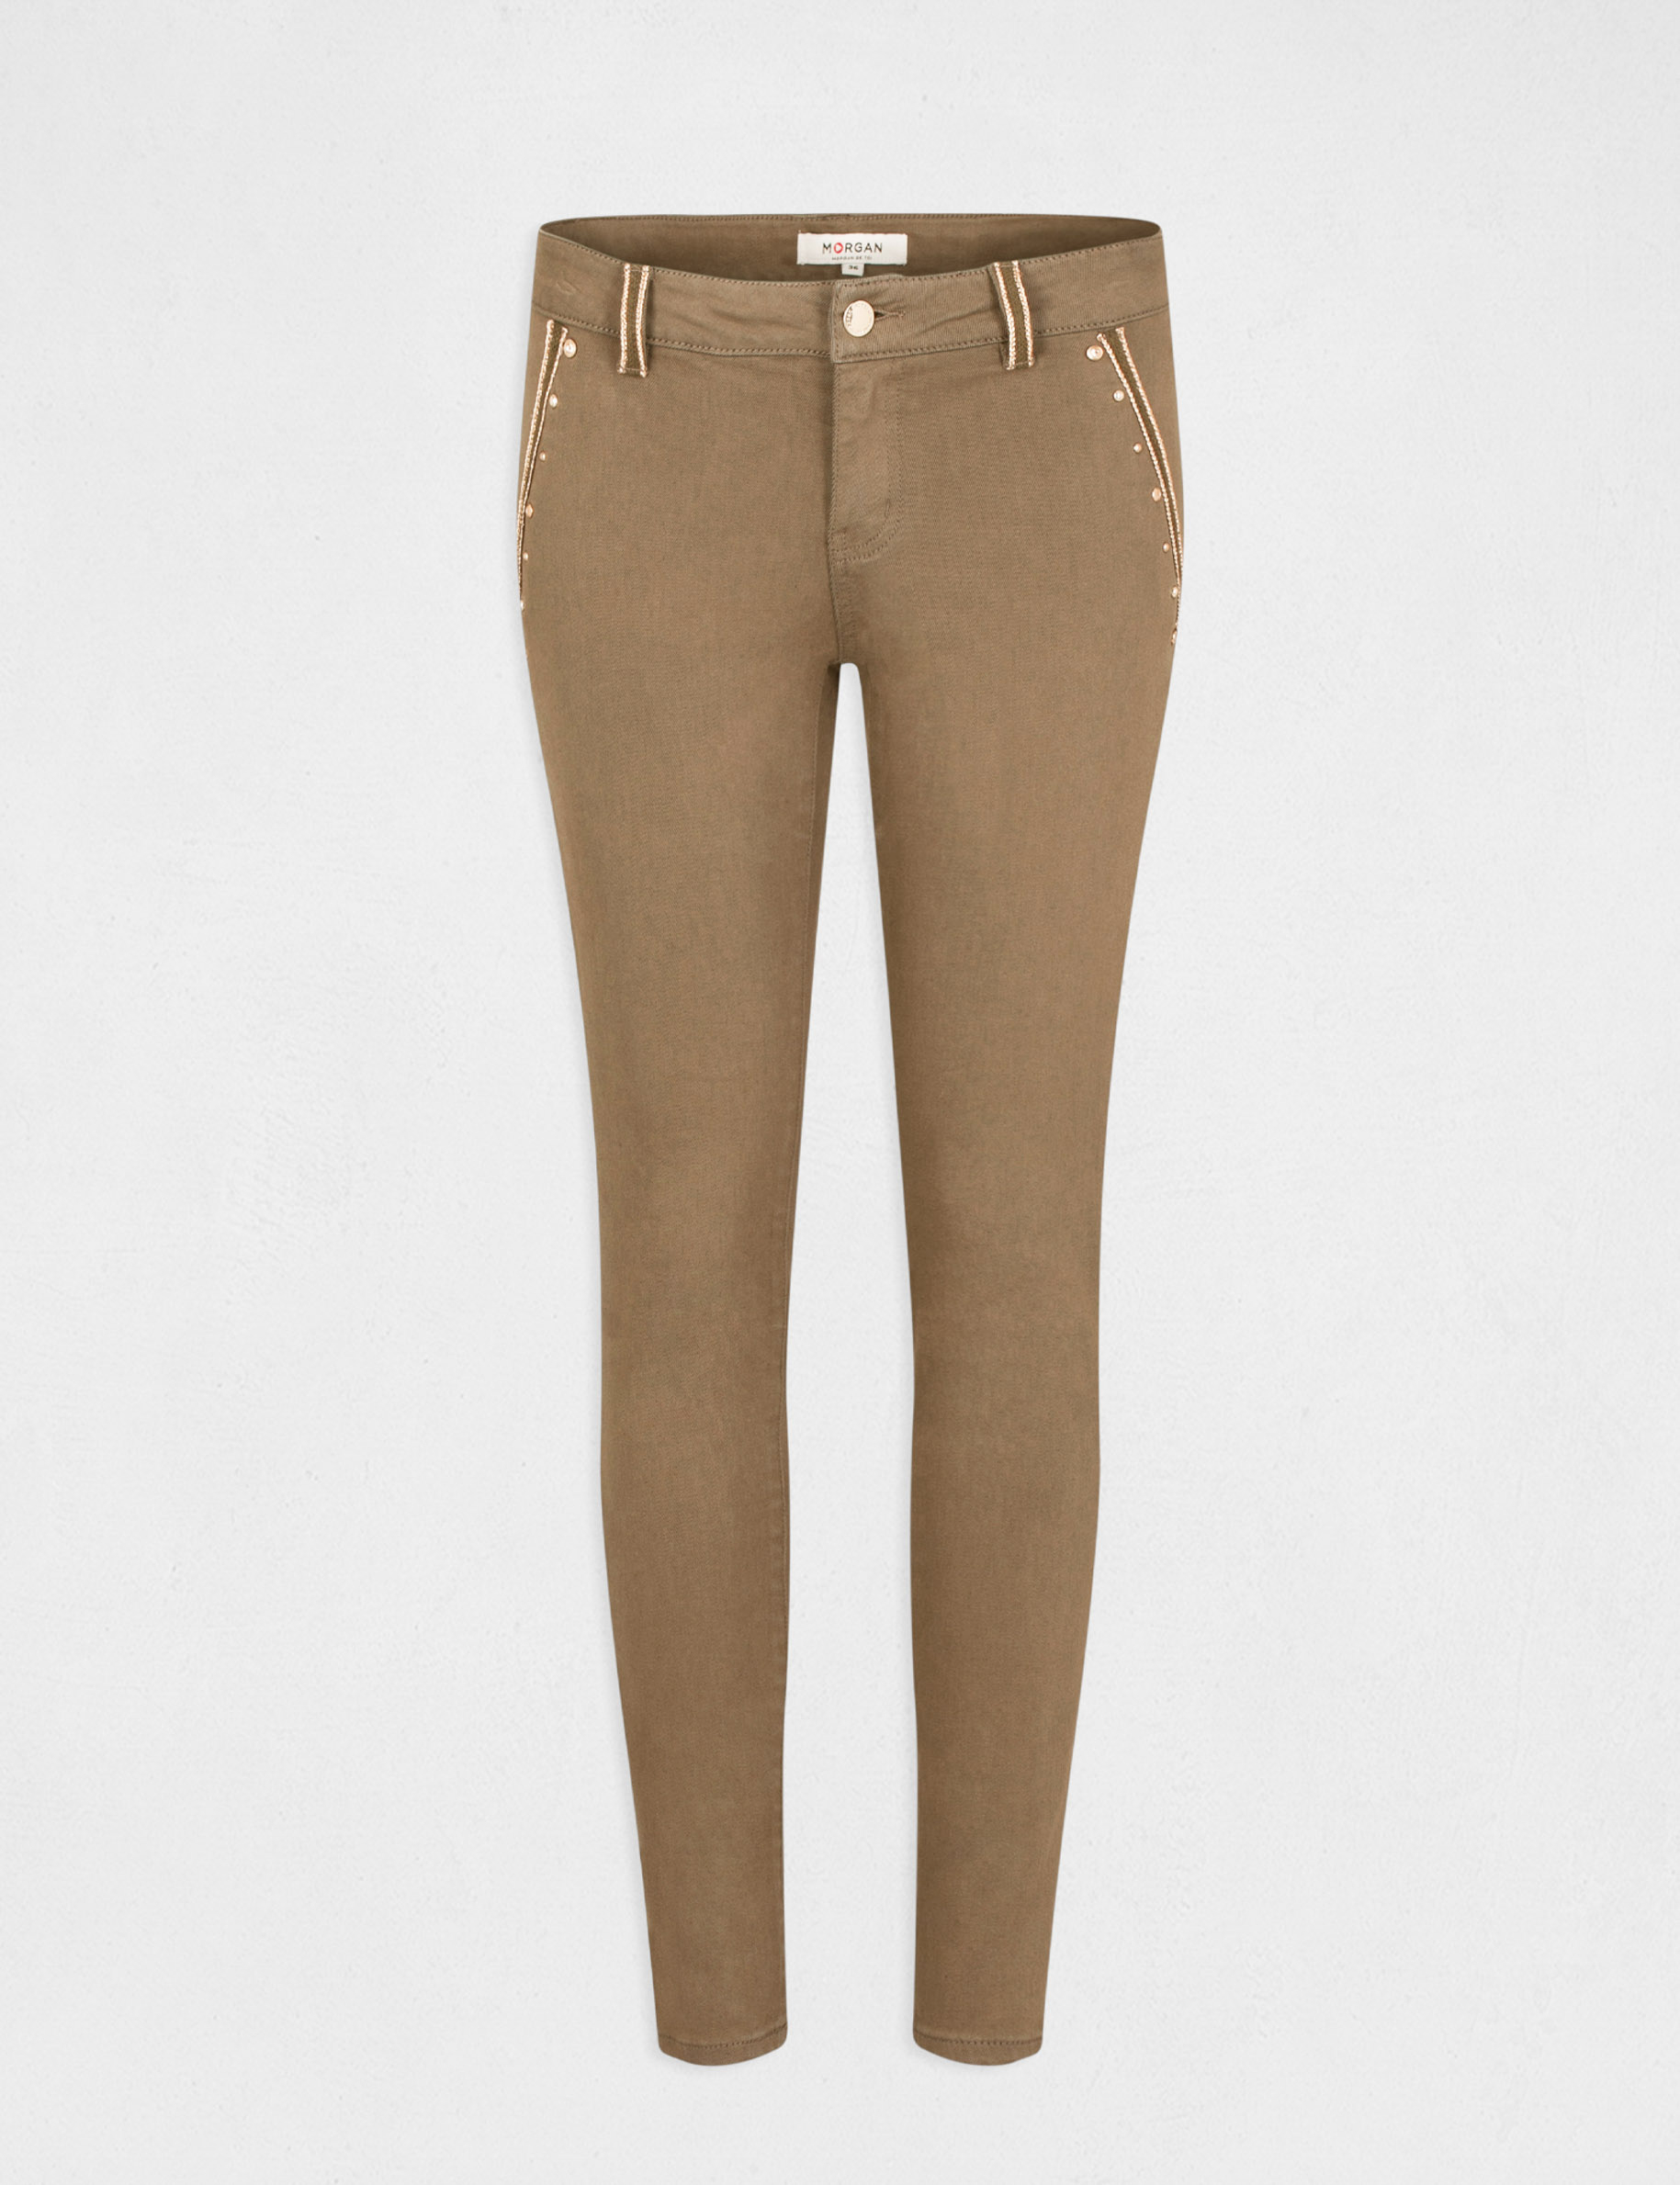 Xpose Bottoms Pants and Trousers  Buy Xpose Women Beige Tapered Fit Skinny  Formal Trousers Online  Nykaa Fashion